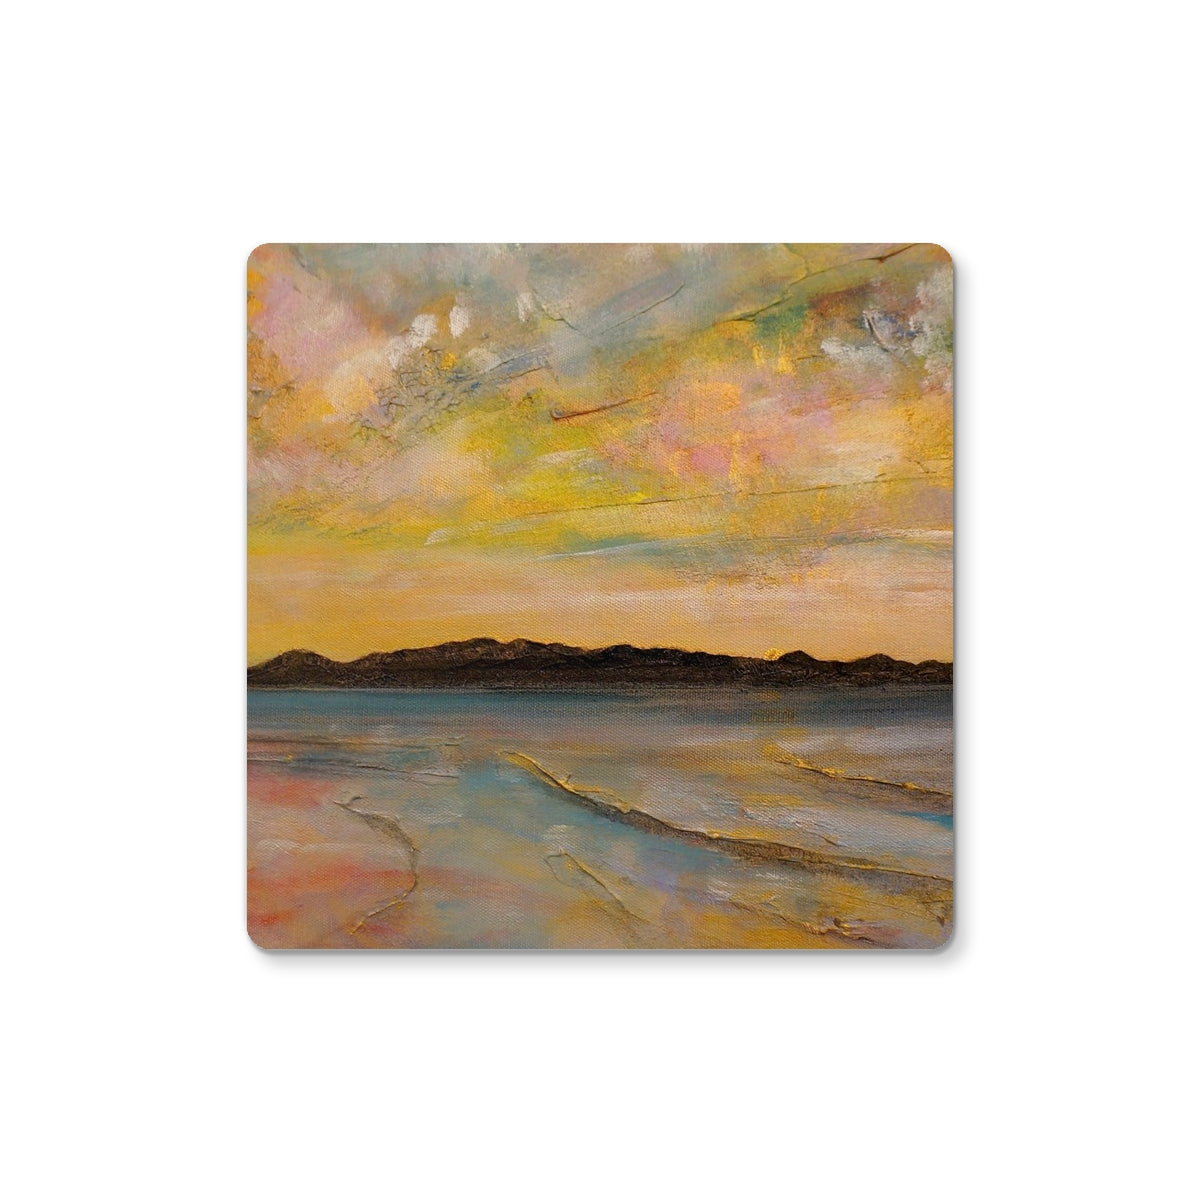 Vallay Island North Uist Art Gifts Coaster-Coasters-Hebridean Islands Art Gallery-6 Coasters-Paintings, Prints, Homeware, Art Gifts From Scotland By Scottish Artist Kevin Hunter